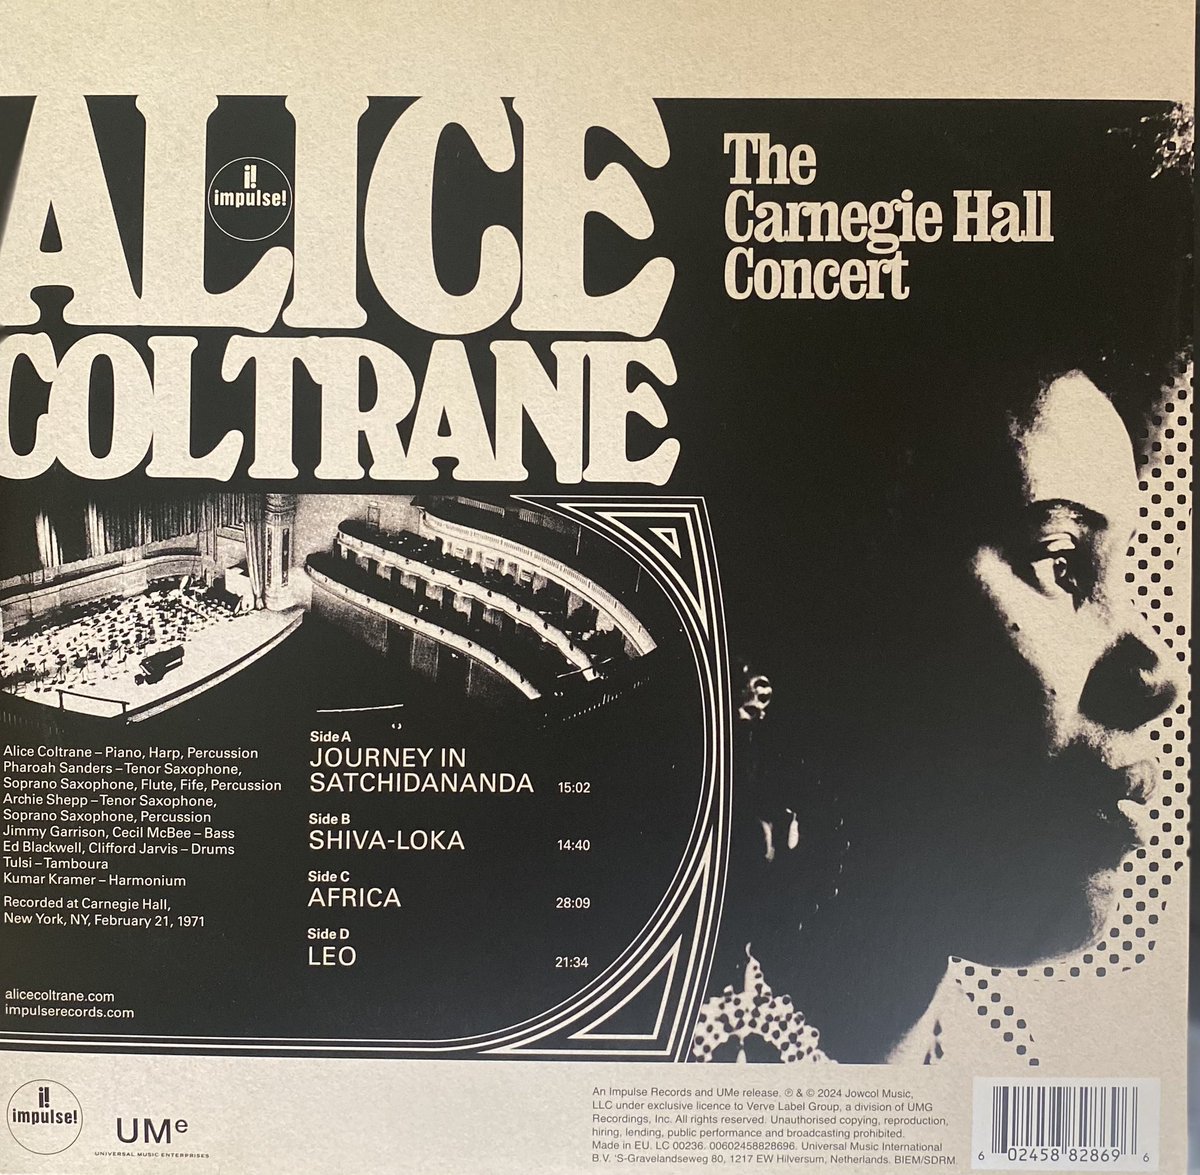 Alice Coltrane is a most fascinating jazz musician; a jazz harpist, pianist & vocalist. She became known for “spiritual” jazz, based on her devotion to Hinduism. This album is a 2024 re-issue of a live performance at Carnegie Hall in 1971. She was wife to John Coltrane